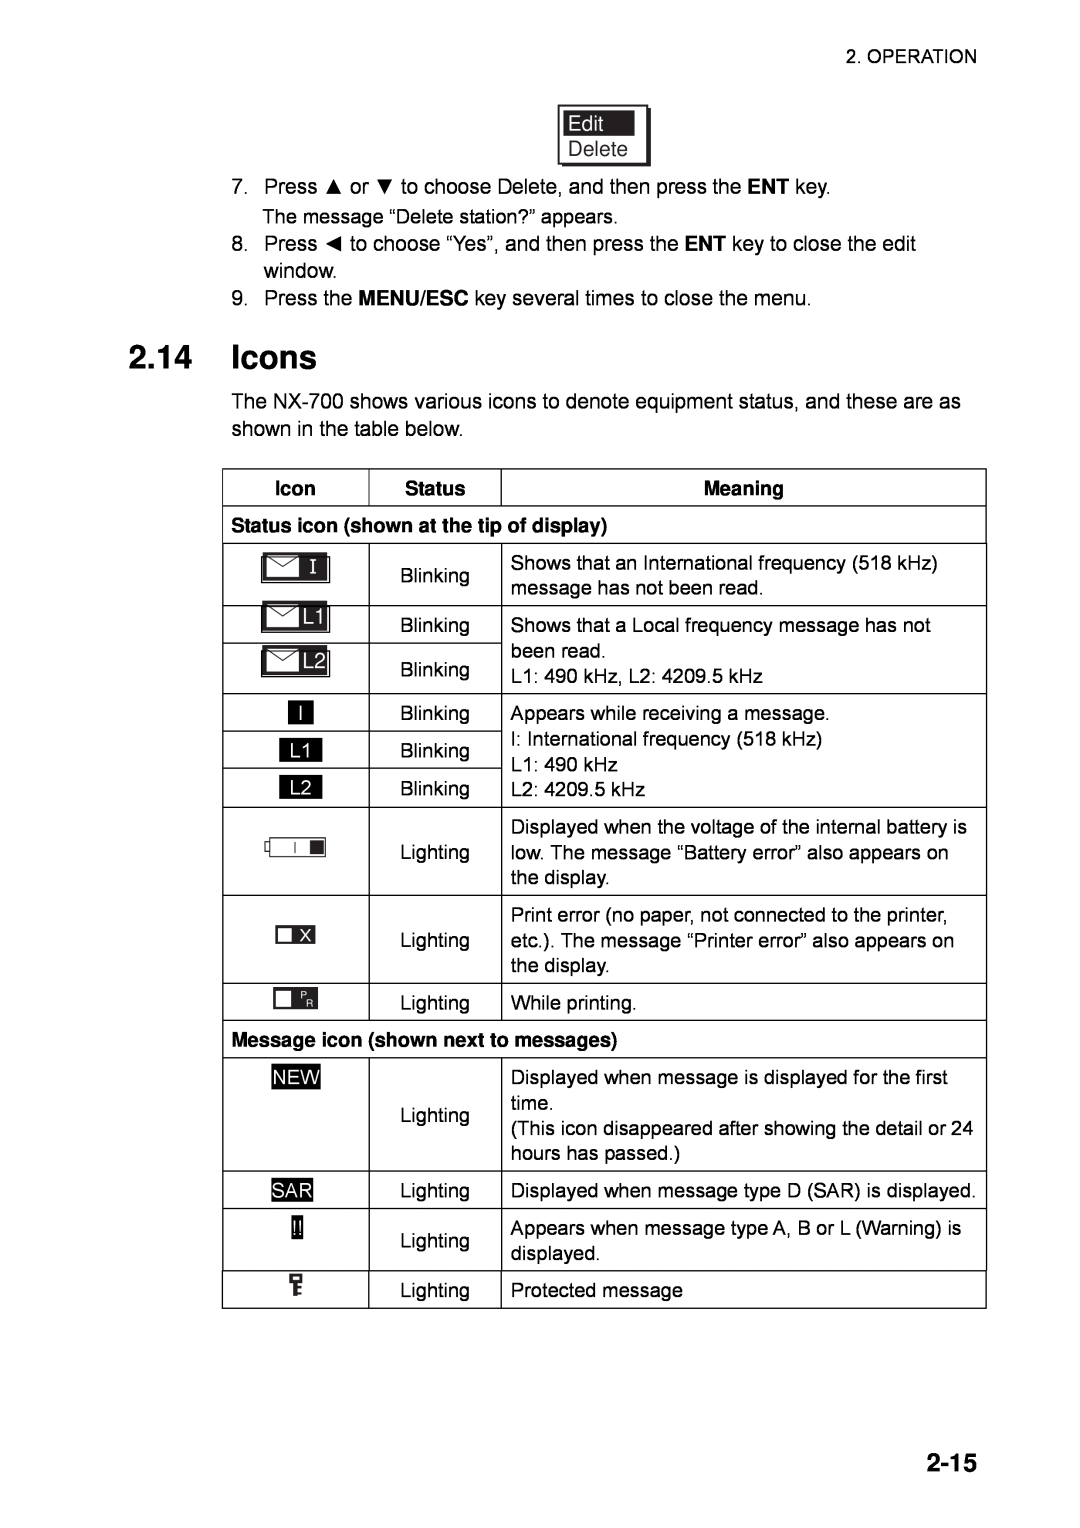 Furuno NX-700B manual 2.14Icons, 2-15, Edit, Meaning, Status icon shown at the tip of display 